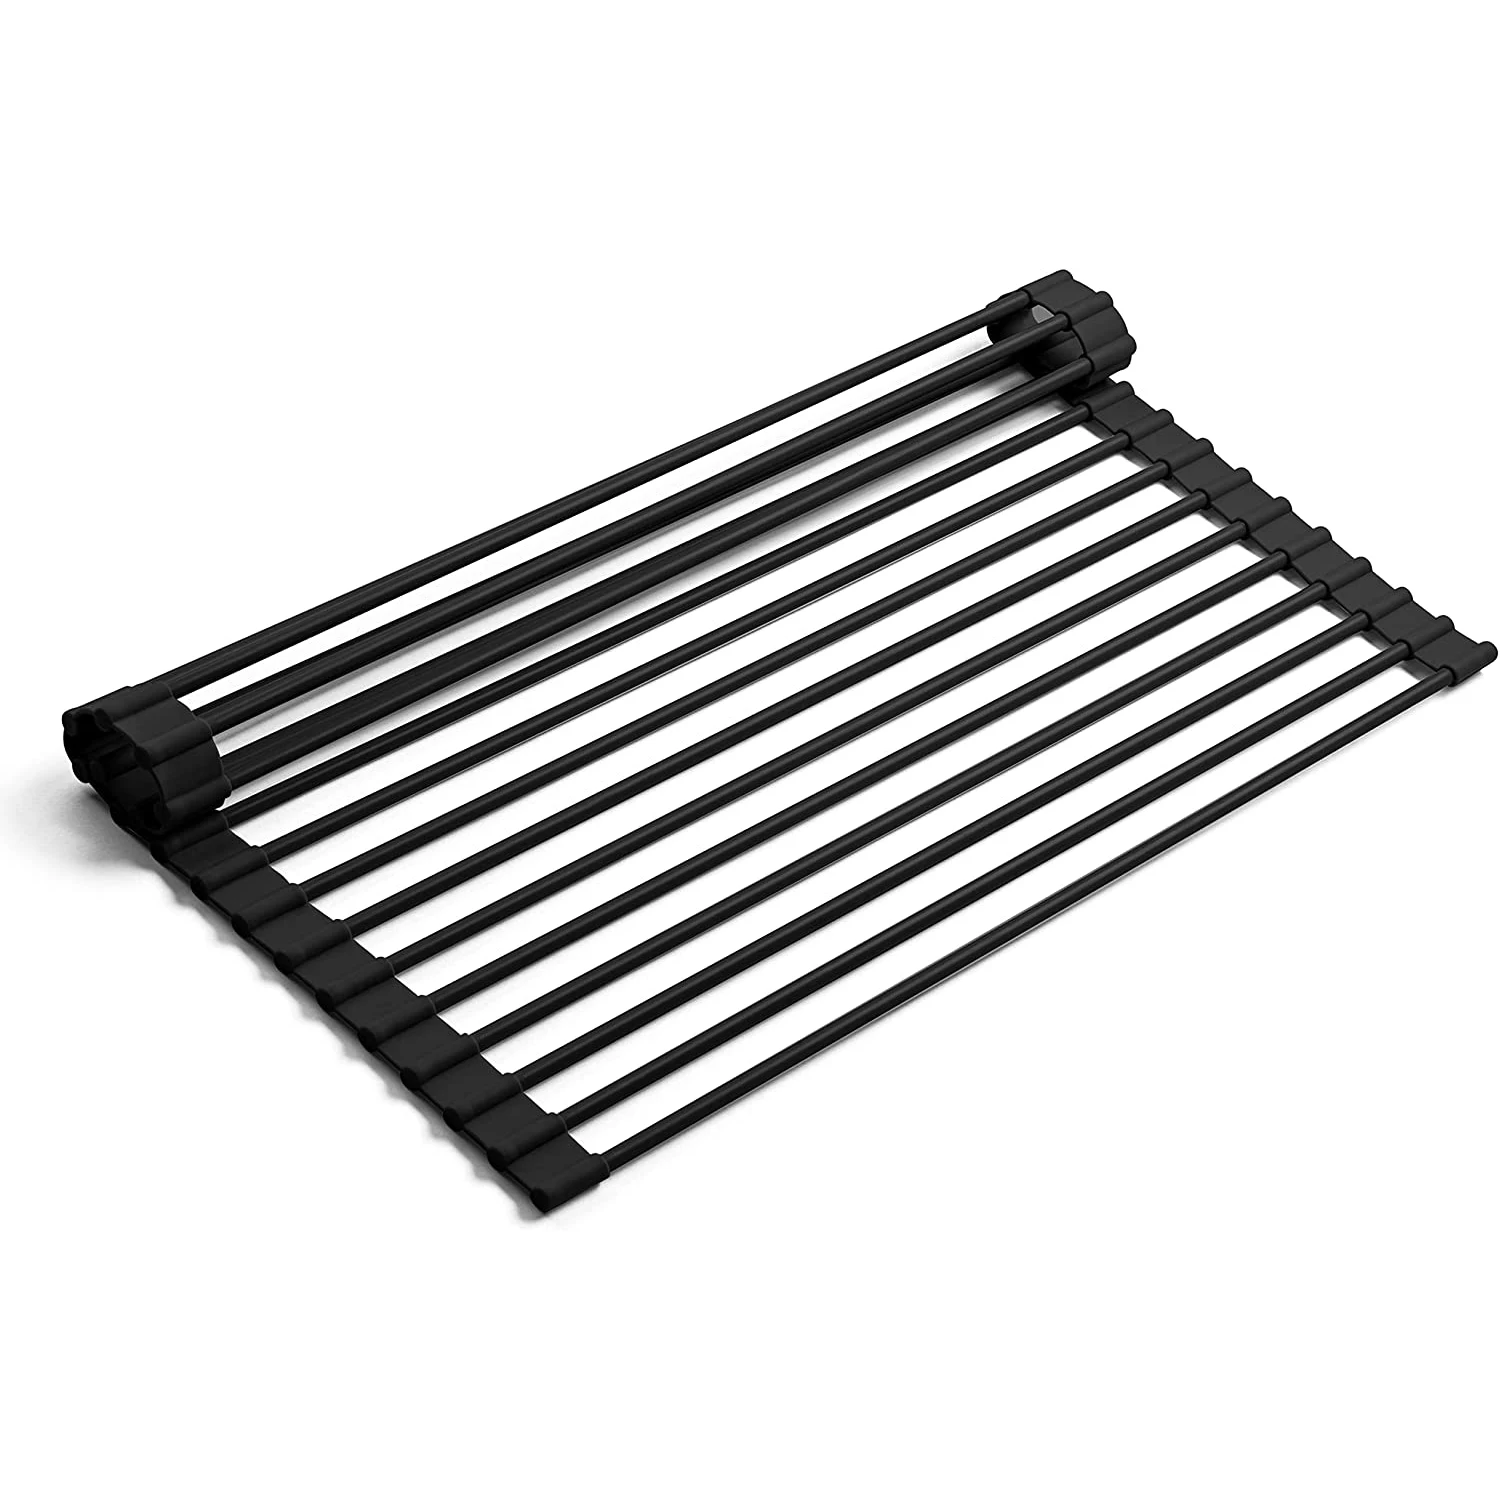 

2022 Tabletex Hot Sale Stainless Steel Collapsible Organizer Drainer Rack Kitchen Over Sink Roll Up Dish Drying Rack, Customizable